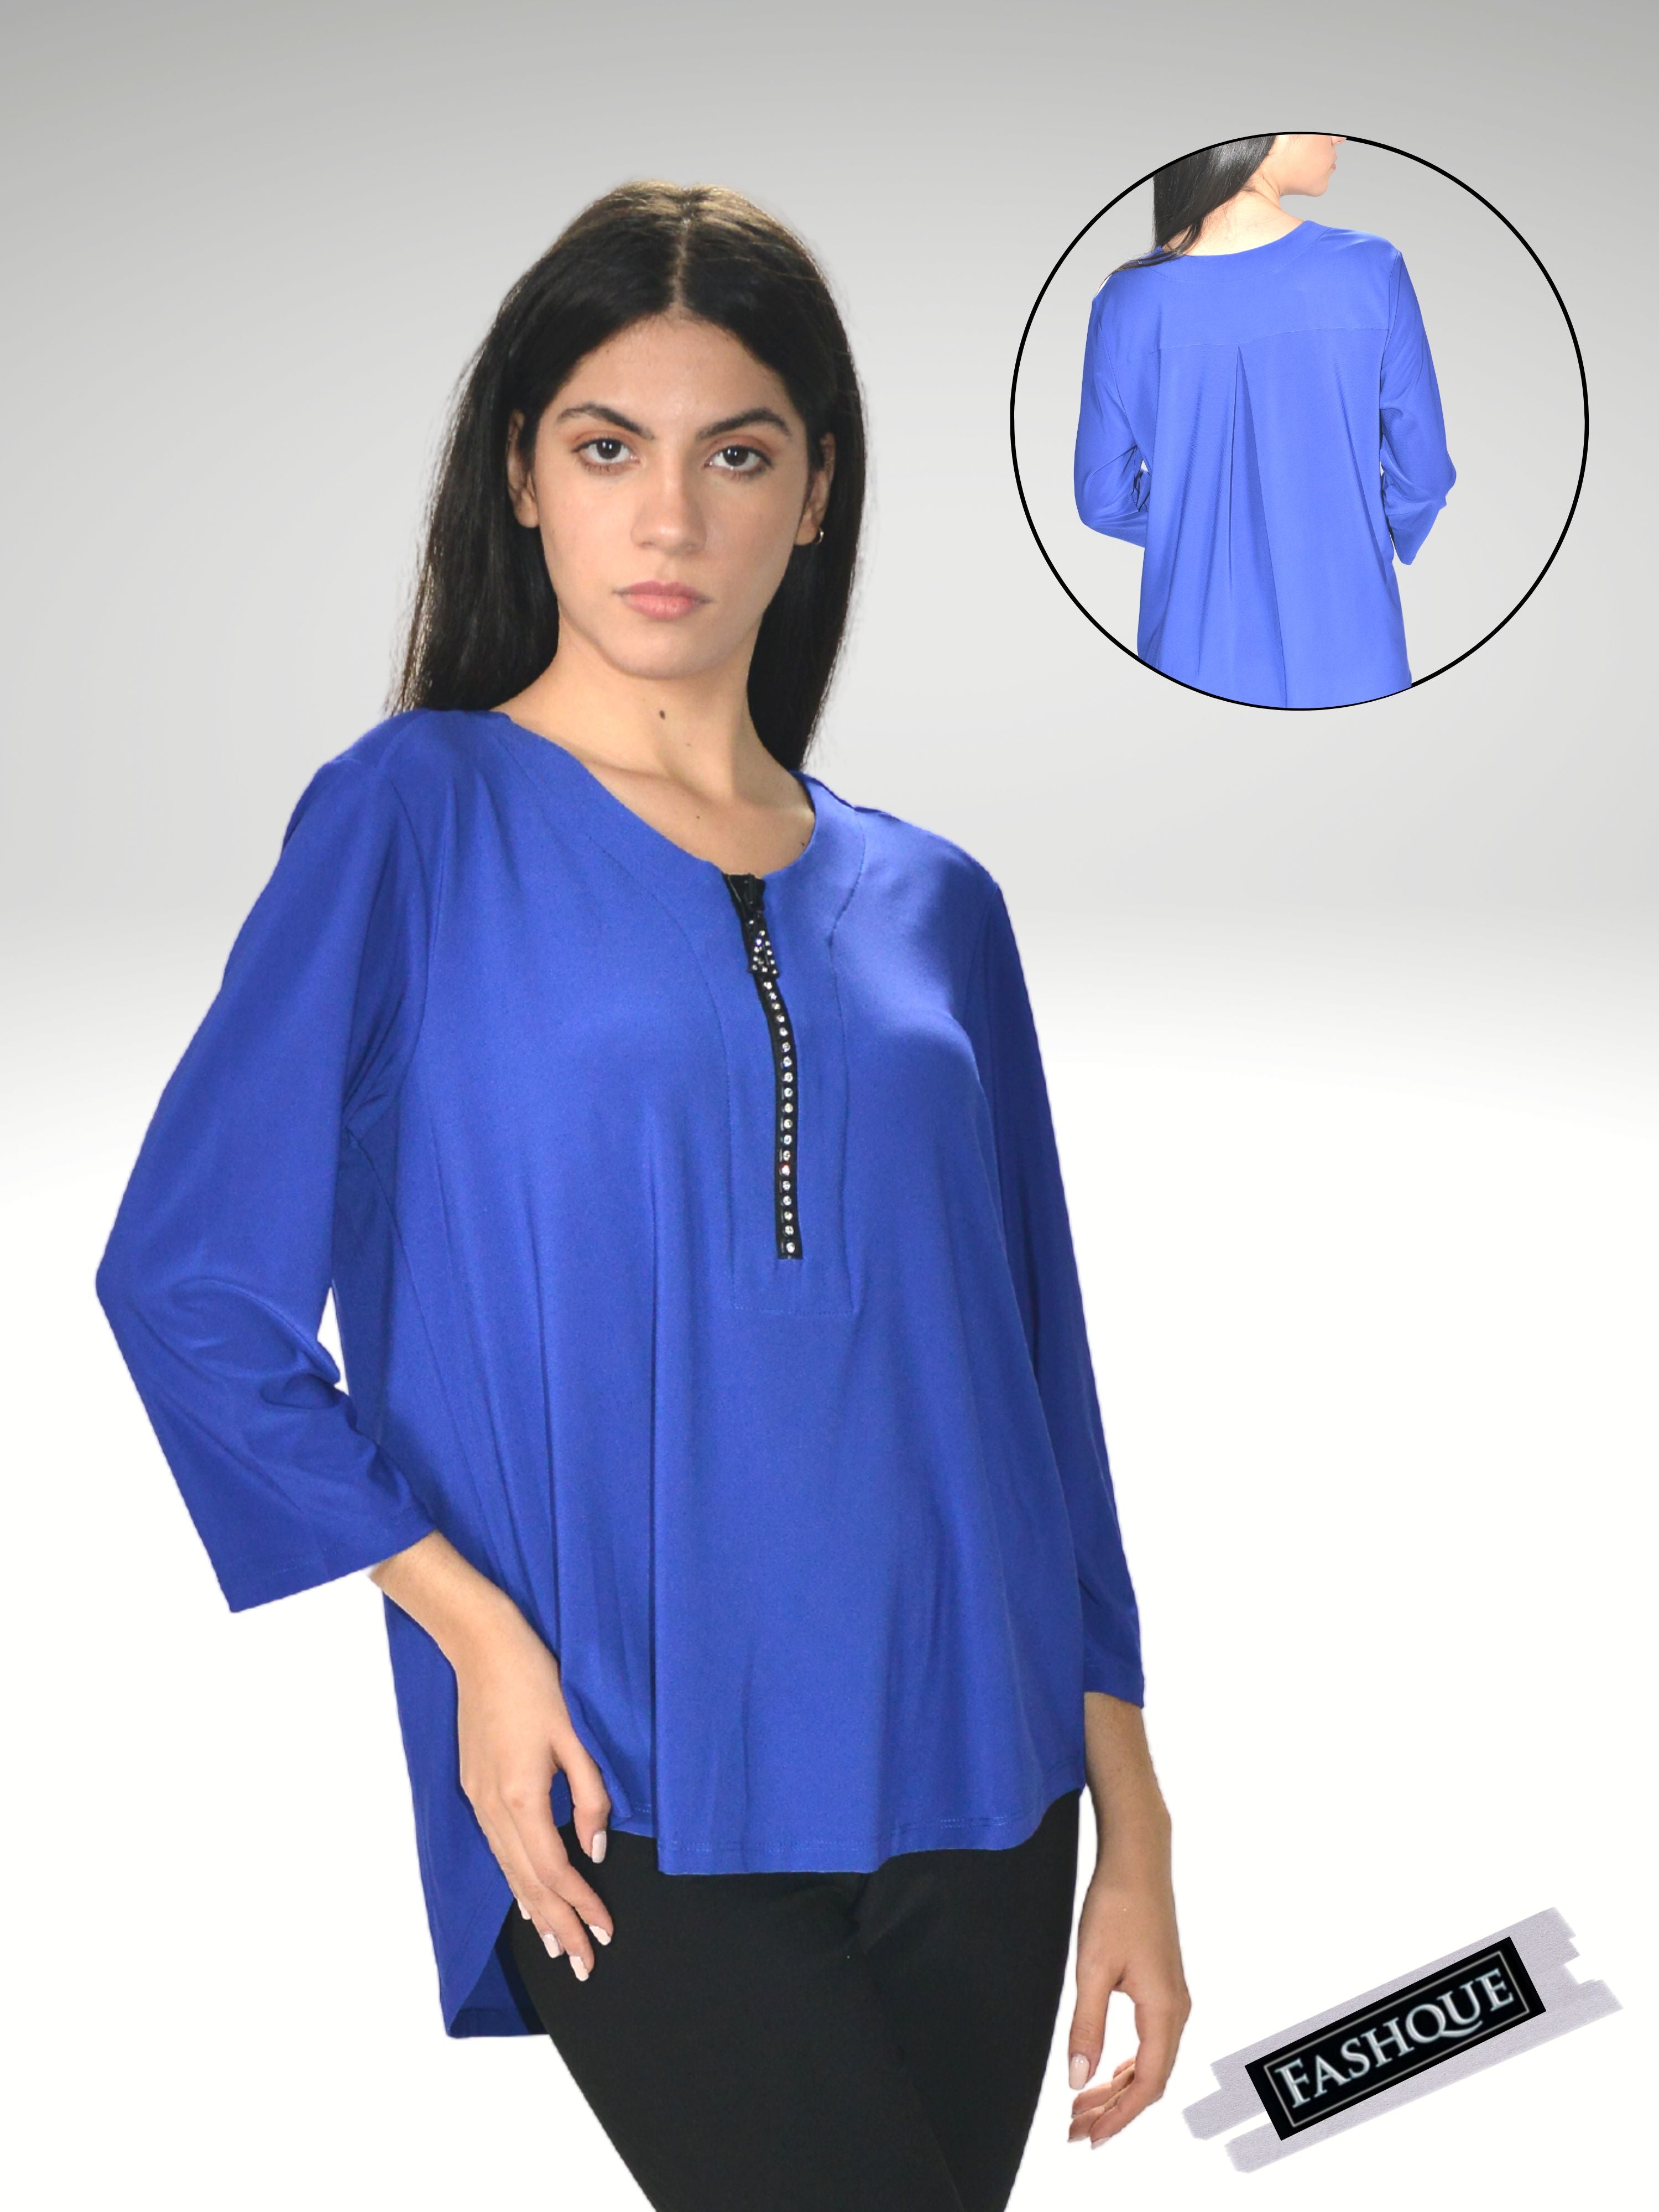 CRYSTAL Zipper Front V Neck 3/4 Sleeve Tunic Top - T610